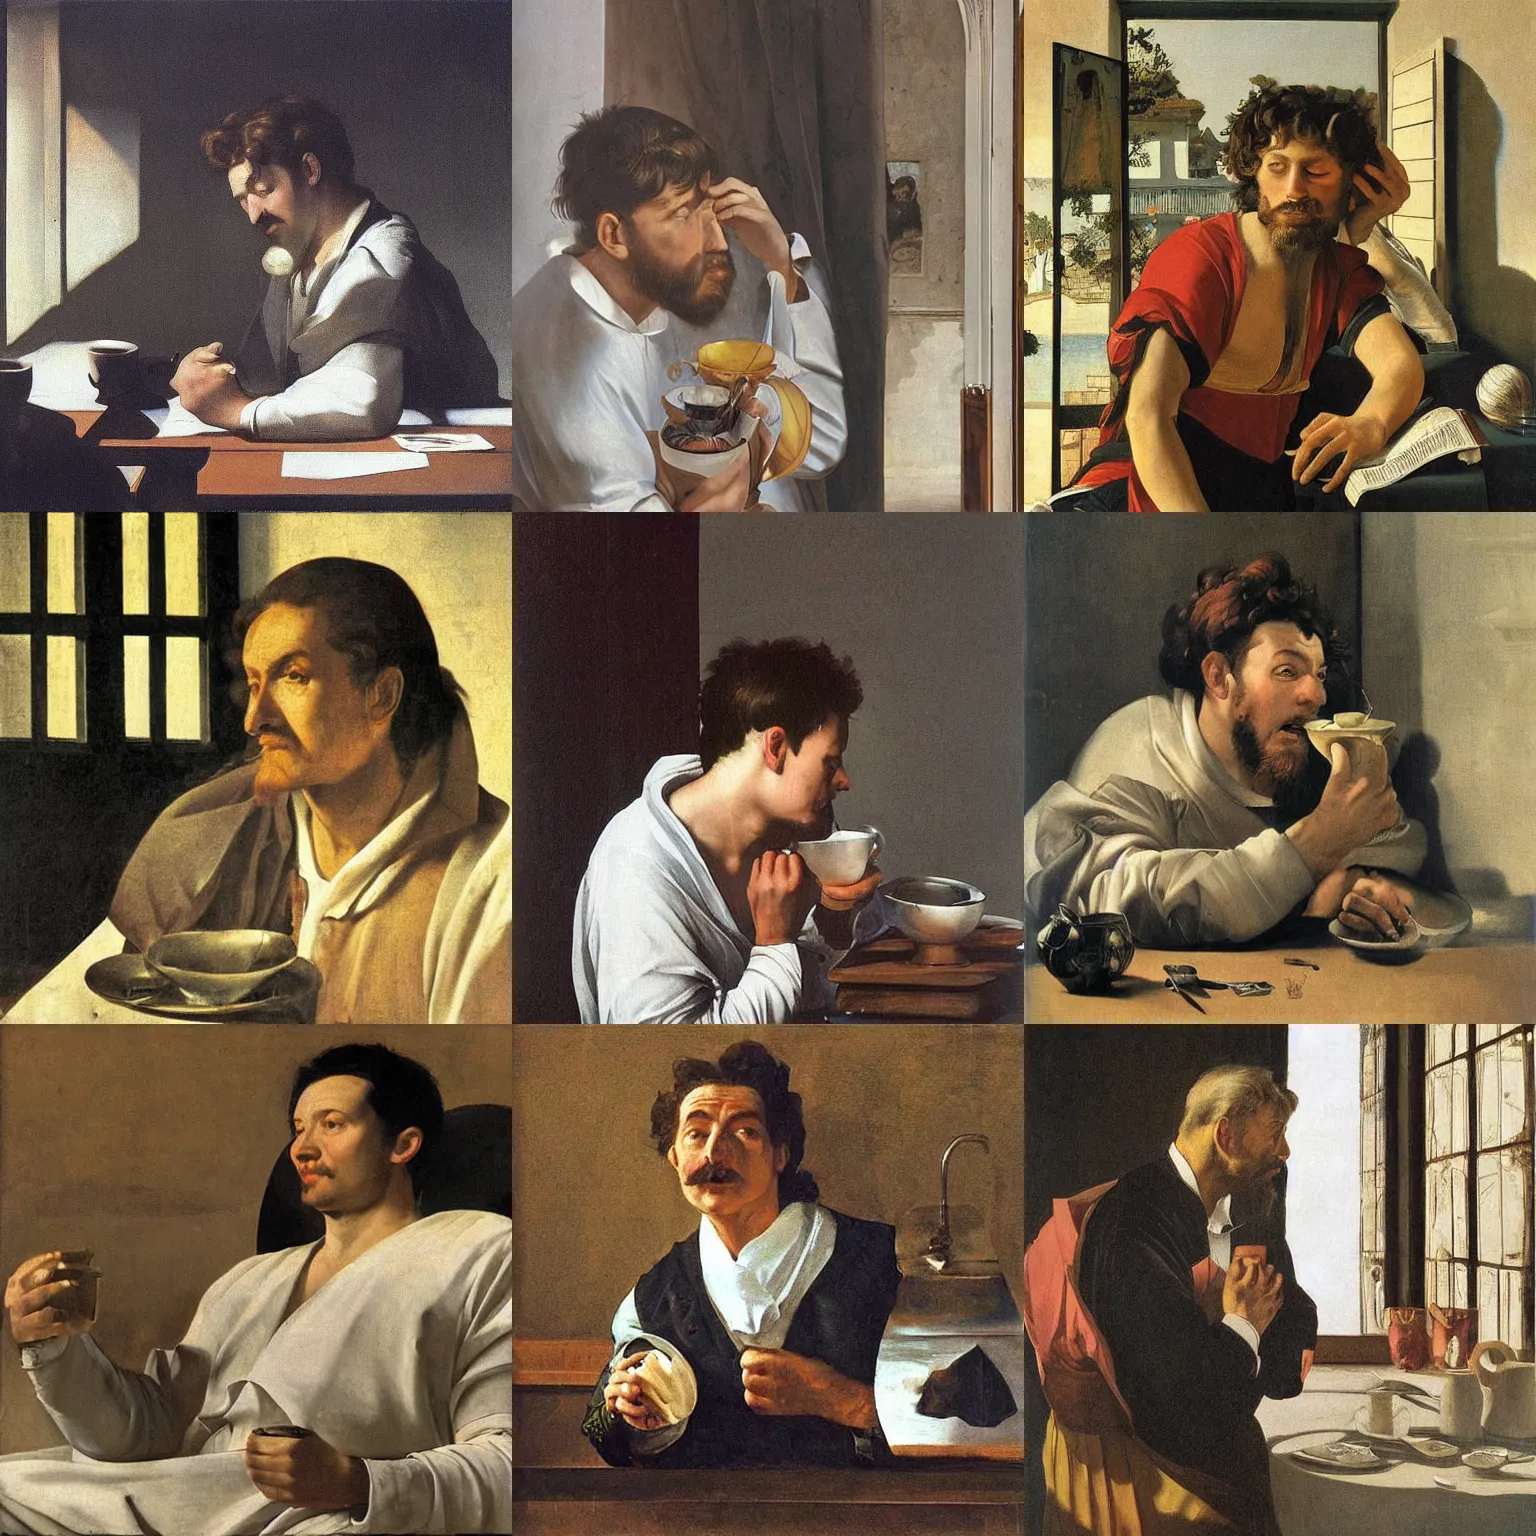 Prompt: It's morning. Sunlight is pouring through the window bathing the face of a man enjoying a hot cup of coffee. A new day has dawned bringing with it new hopes and aspirations. Painting by Caravaggio, 1604